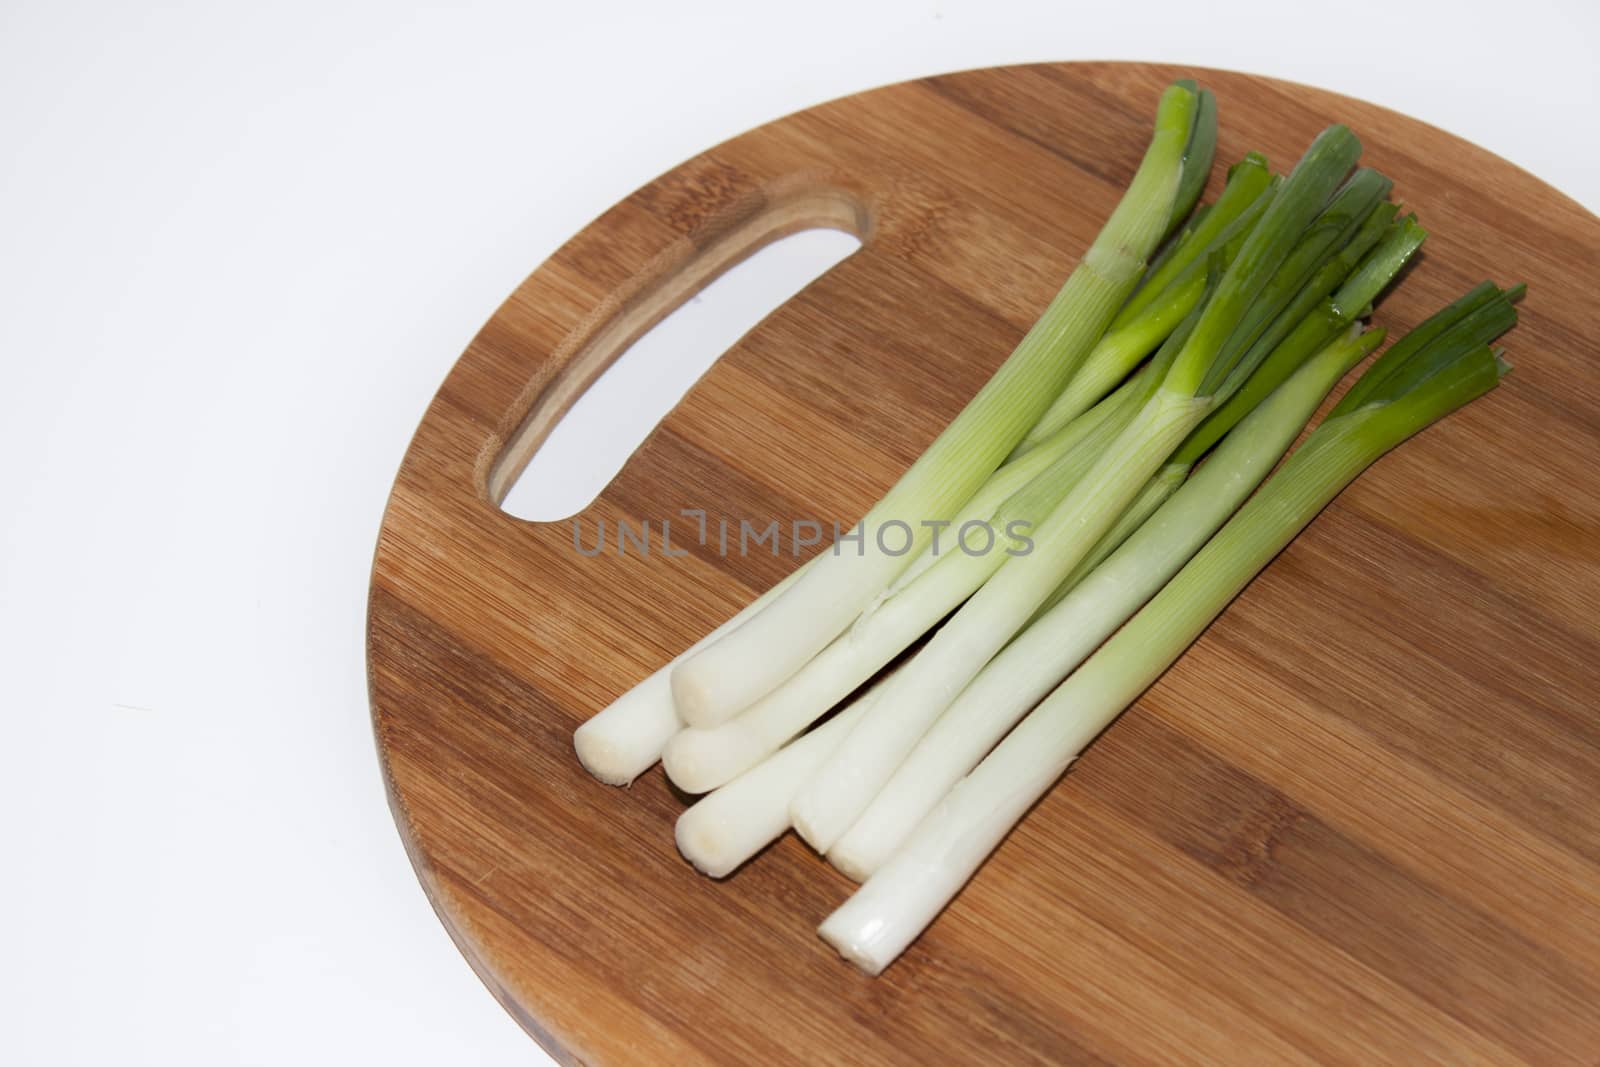 Young onions on the kitchen wooden board by zlajaphoto